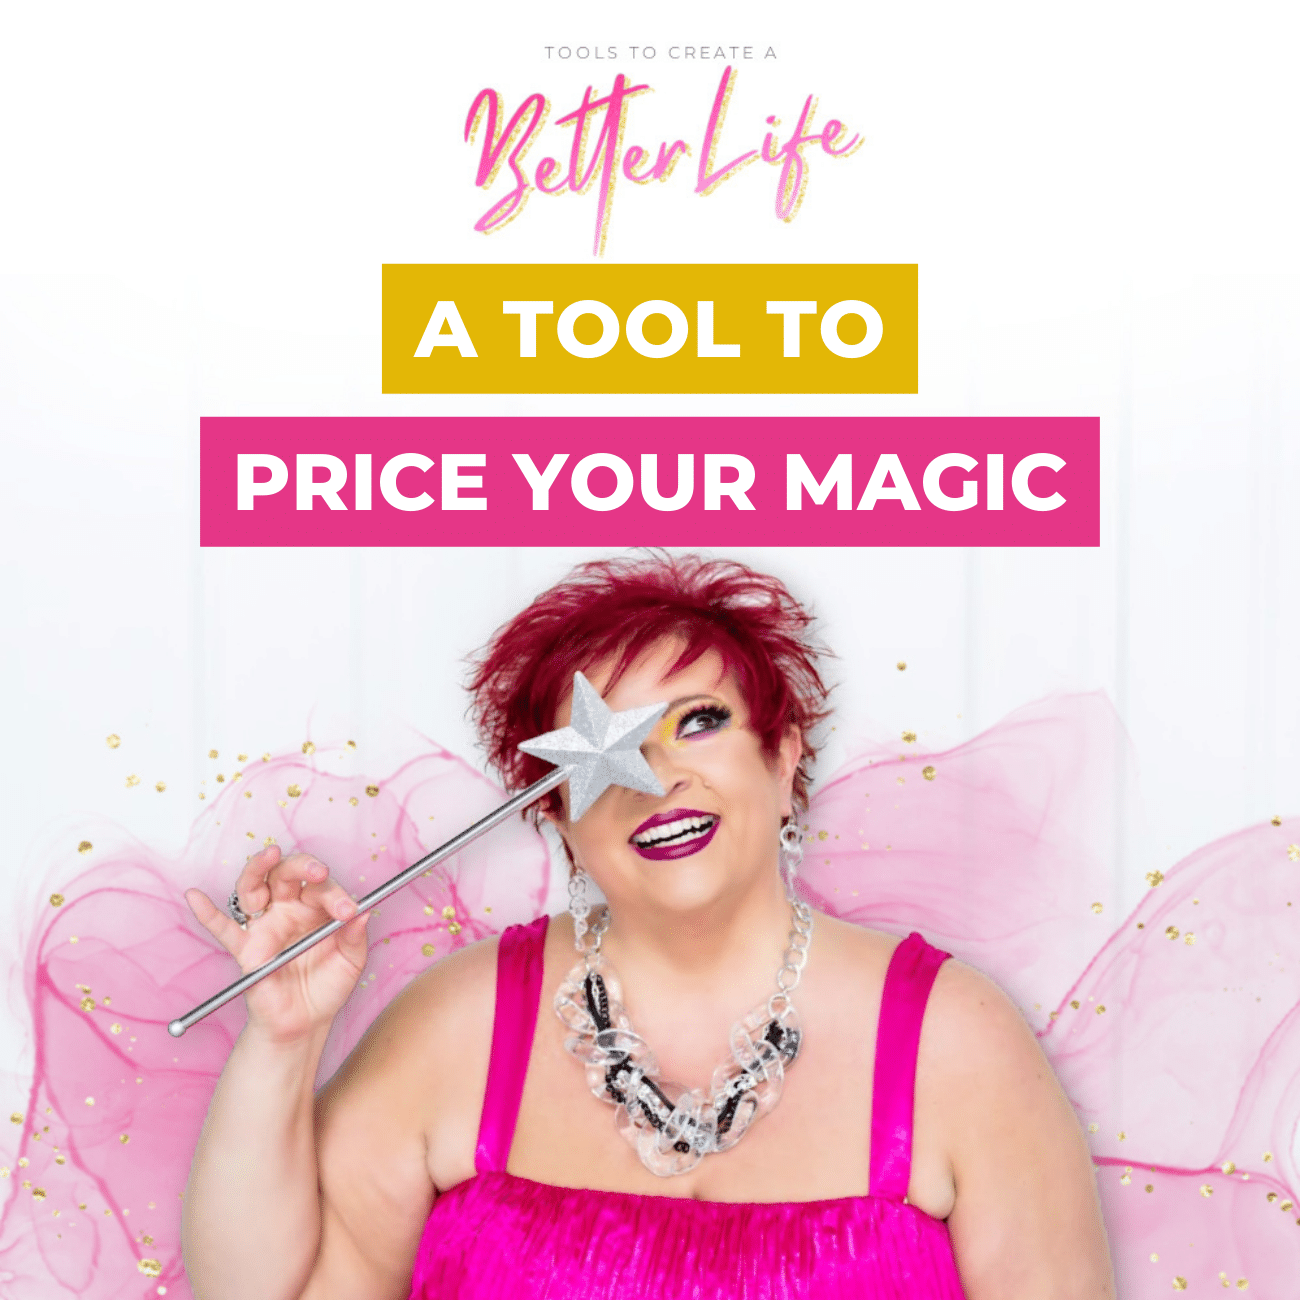 A Tool to Price Your Magic